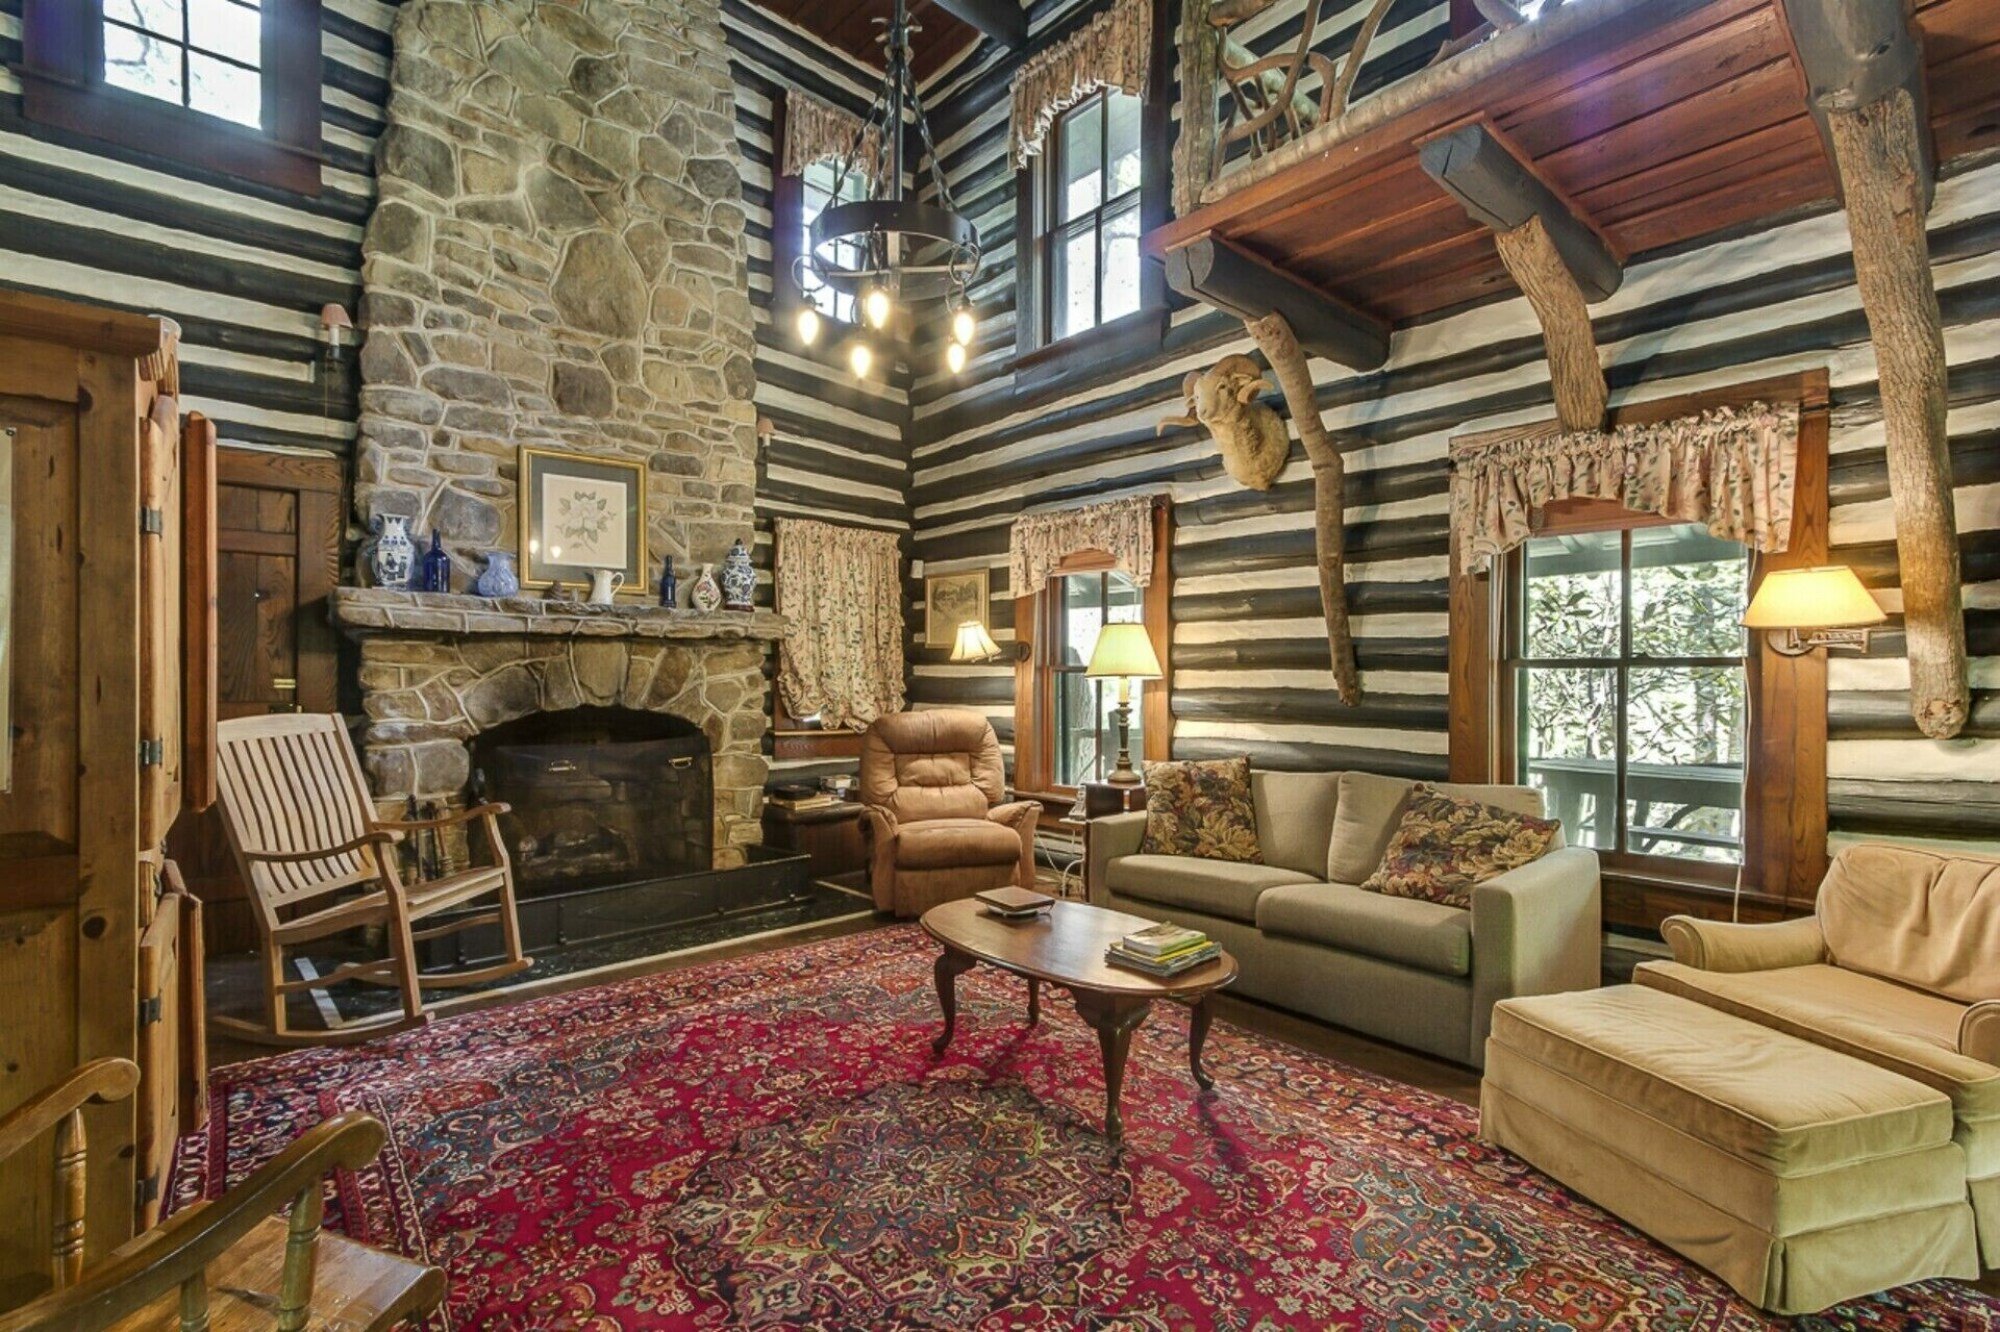 Interior of the living room of a log cabin